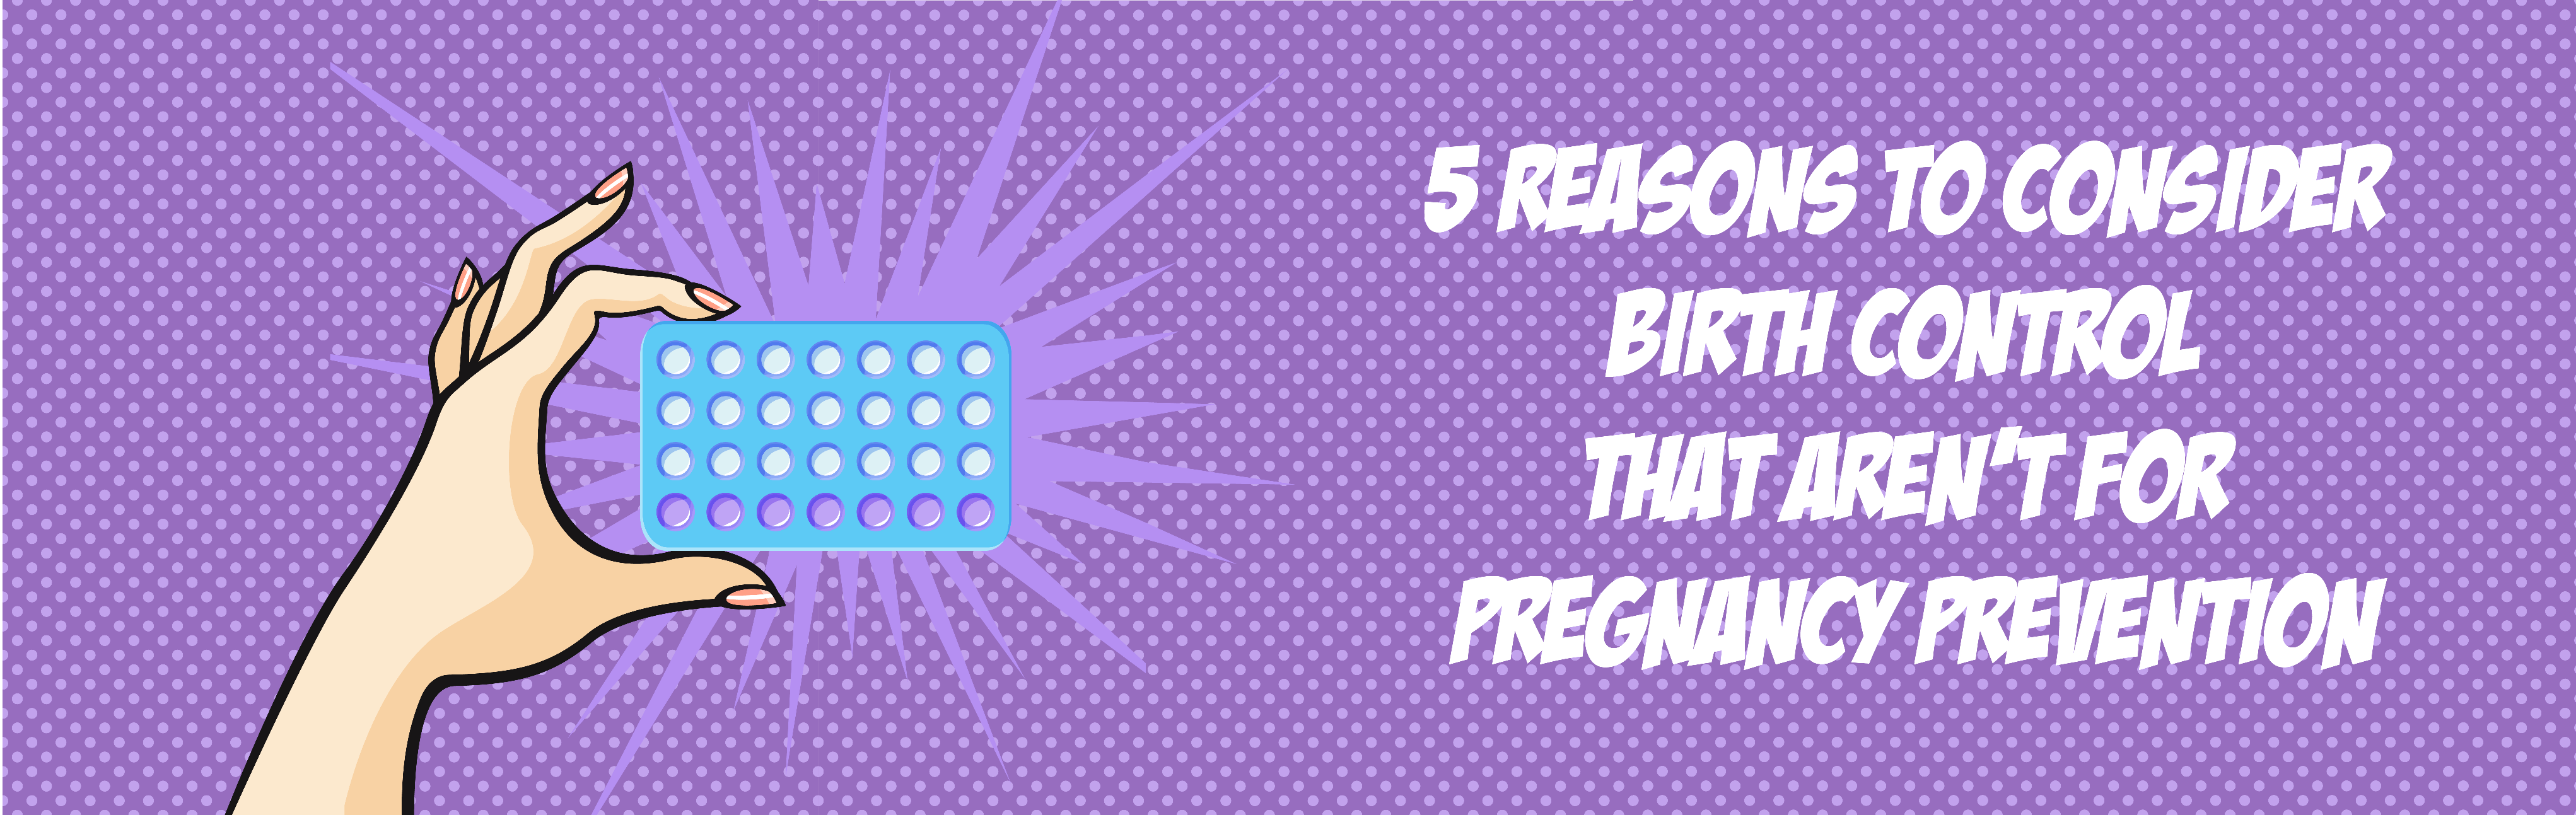 Birth Control Is The Practice Of Preventing